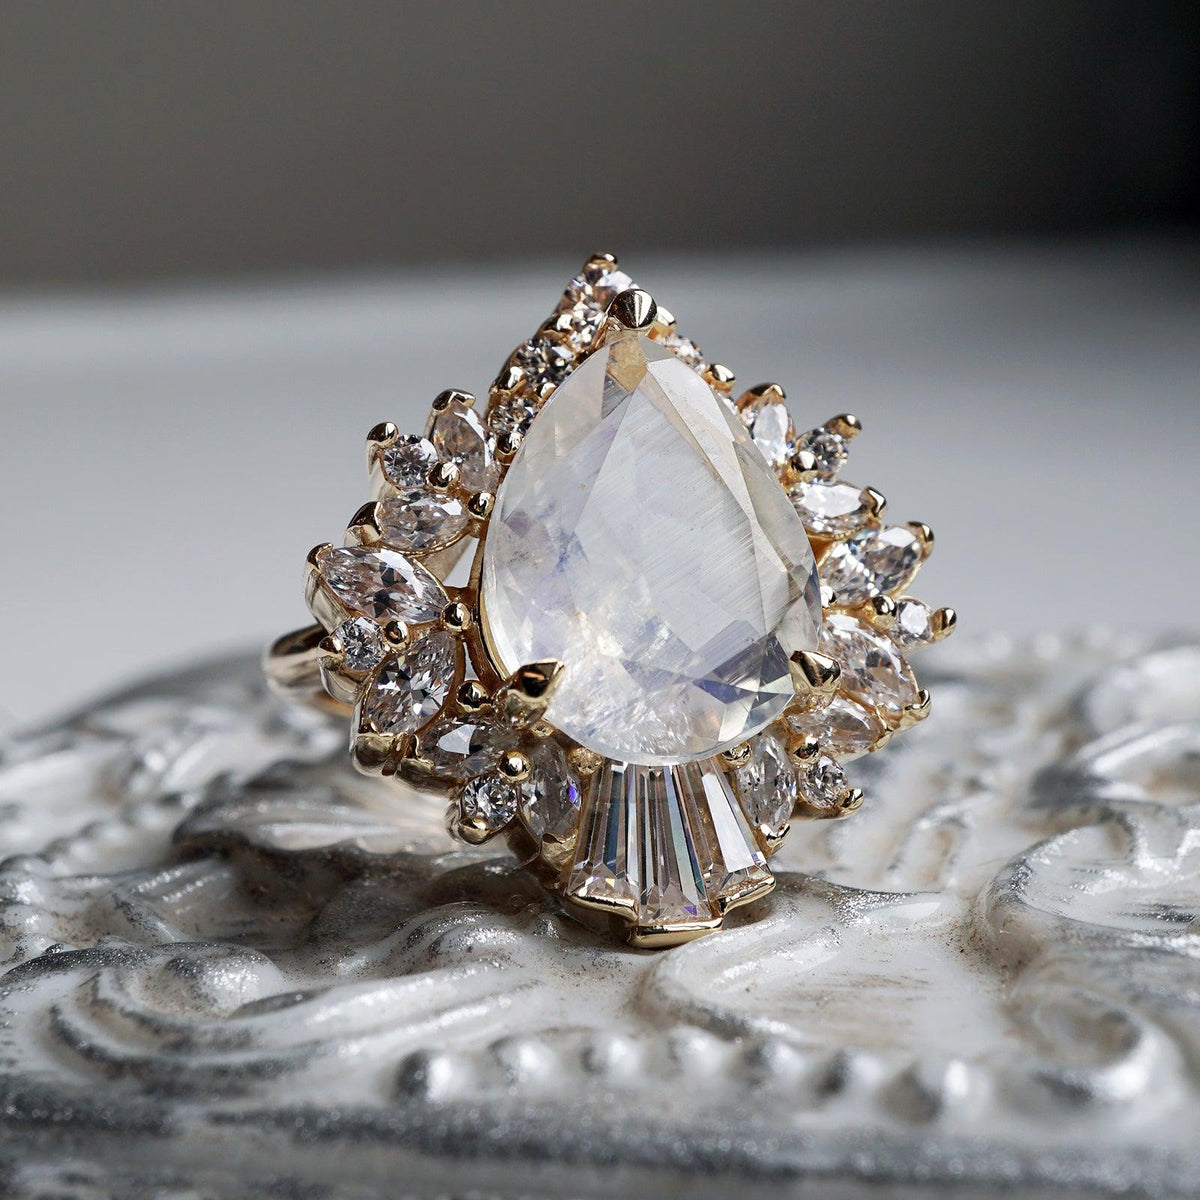 Hall Of Mirrors Moonstone Diamond Ring in 14K and 18K Gold - Tippy Taste Jewelry